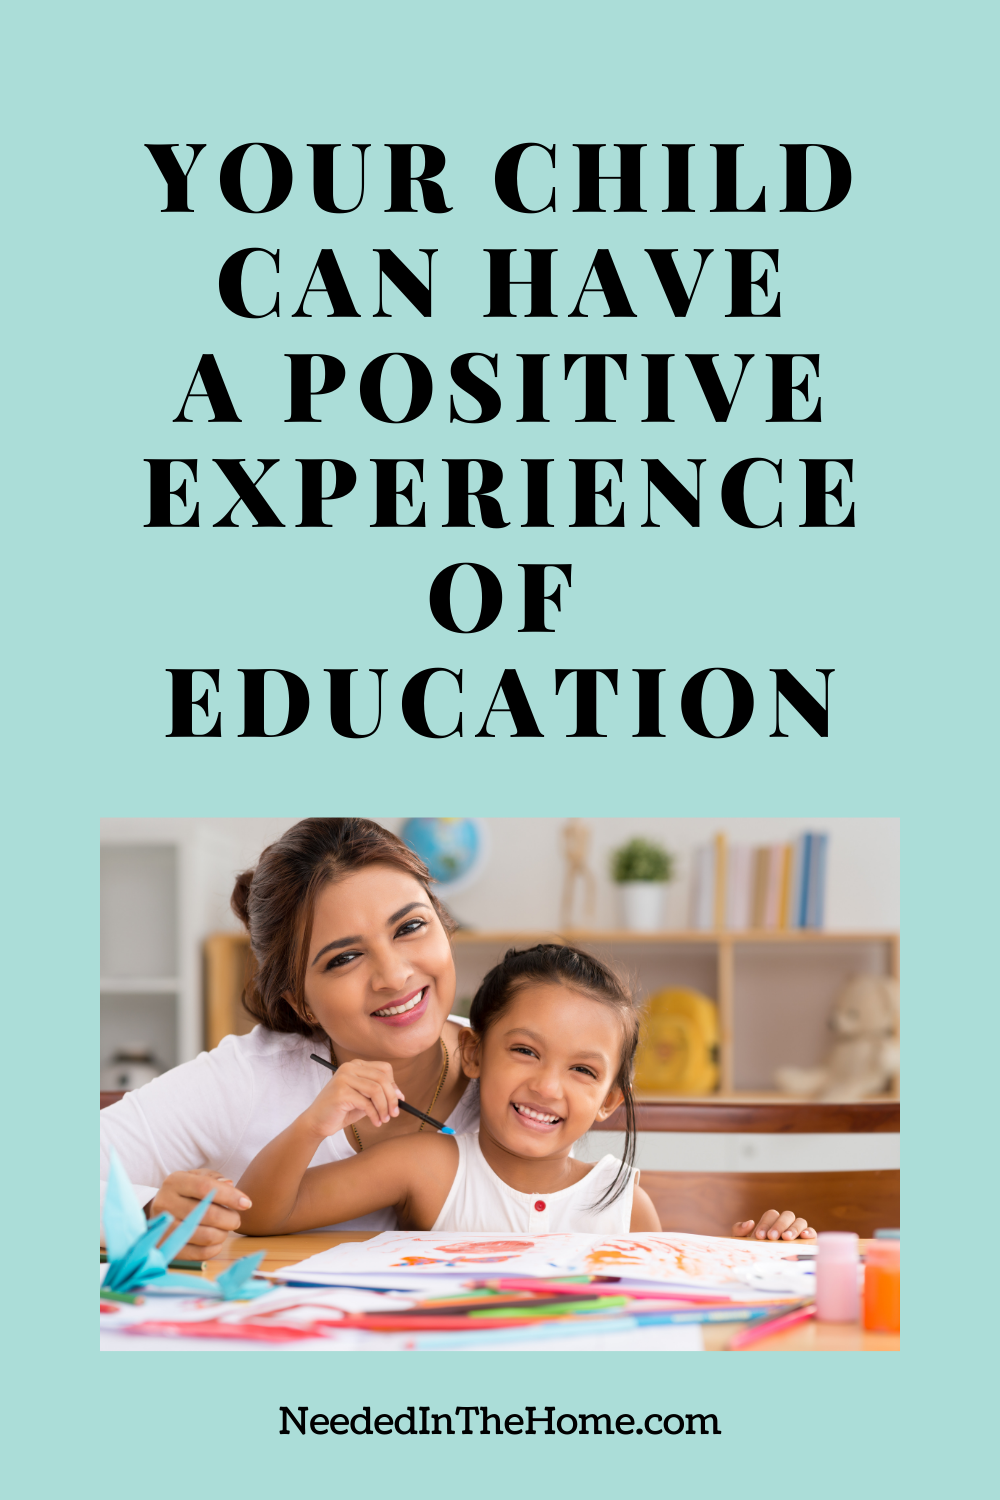 pinterest-pin-description your child can have a positive experience of education mother and daughter doing homeschool art together neededinthehome